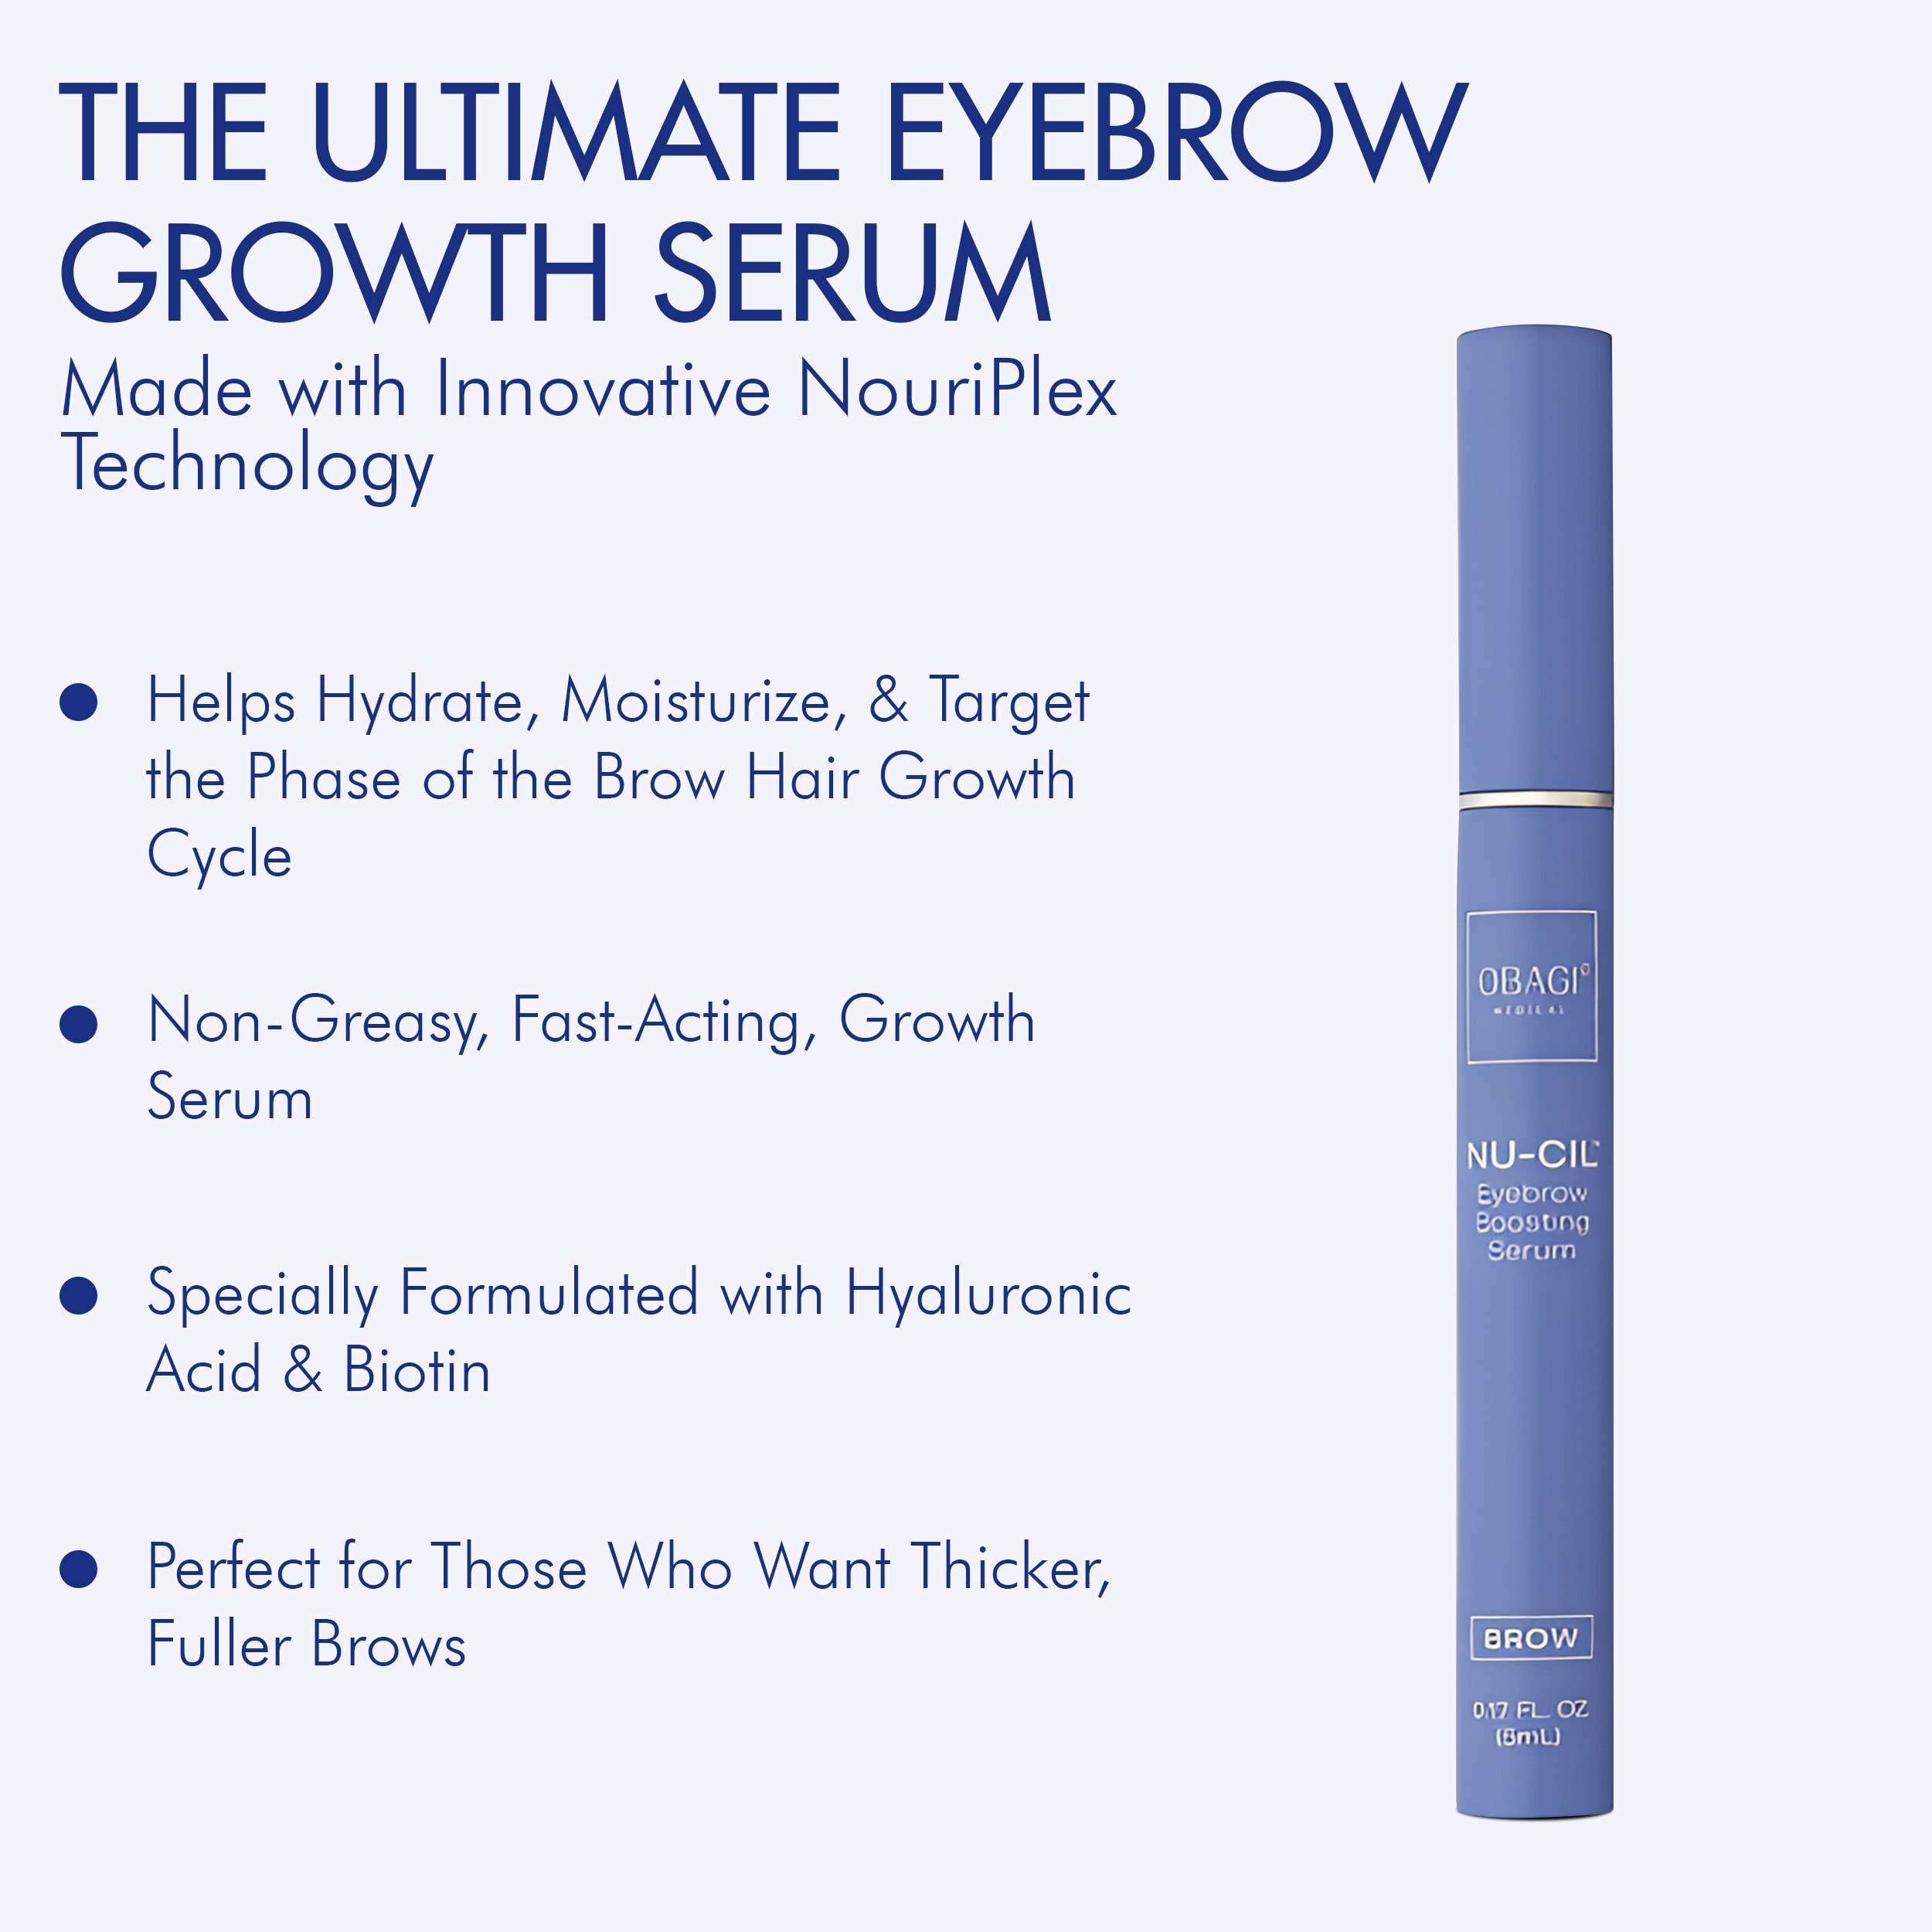 Obagi Nu-Cil Eyebrow Boosting Serum - Ultimate Eyebrow Growth Serum with Hyaluronic Acid - Dermatologist Approved Brow Serum for Thin, Patchy & Over-Tweezed Eyebrows - Fast Absorbing - 6ml